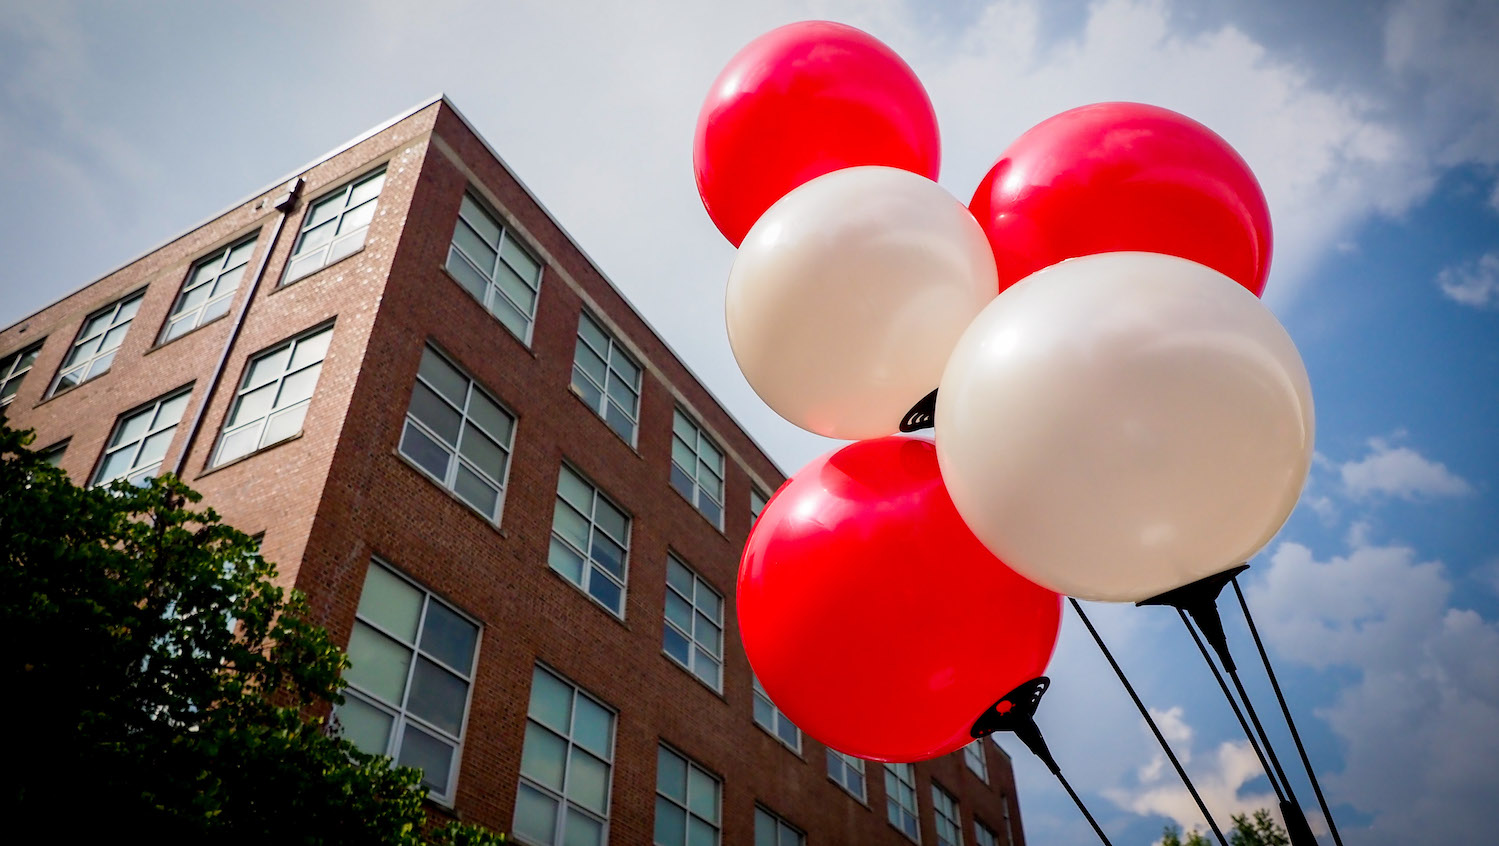 Nelson Hall and Balloons